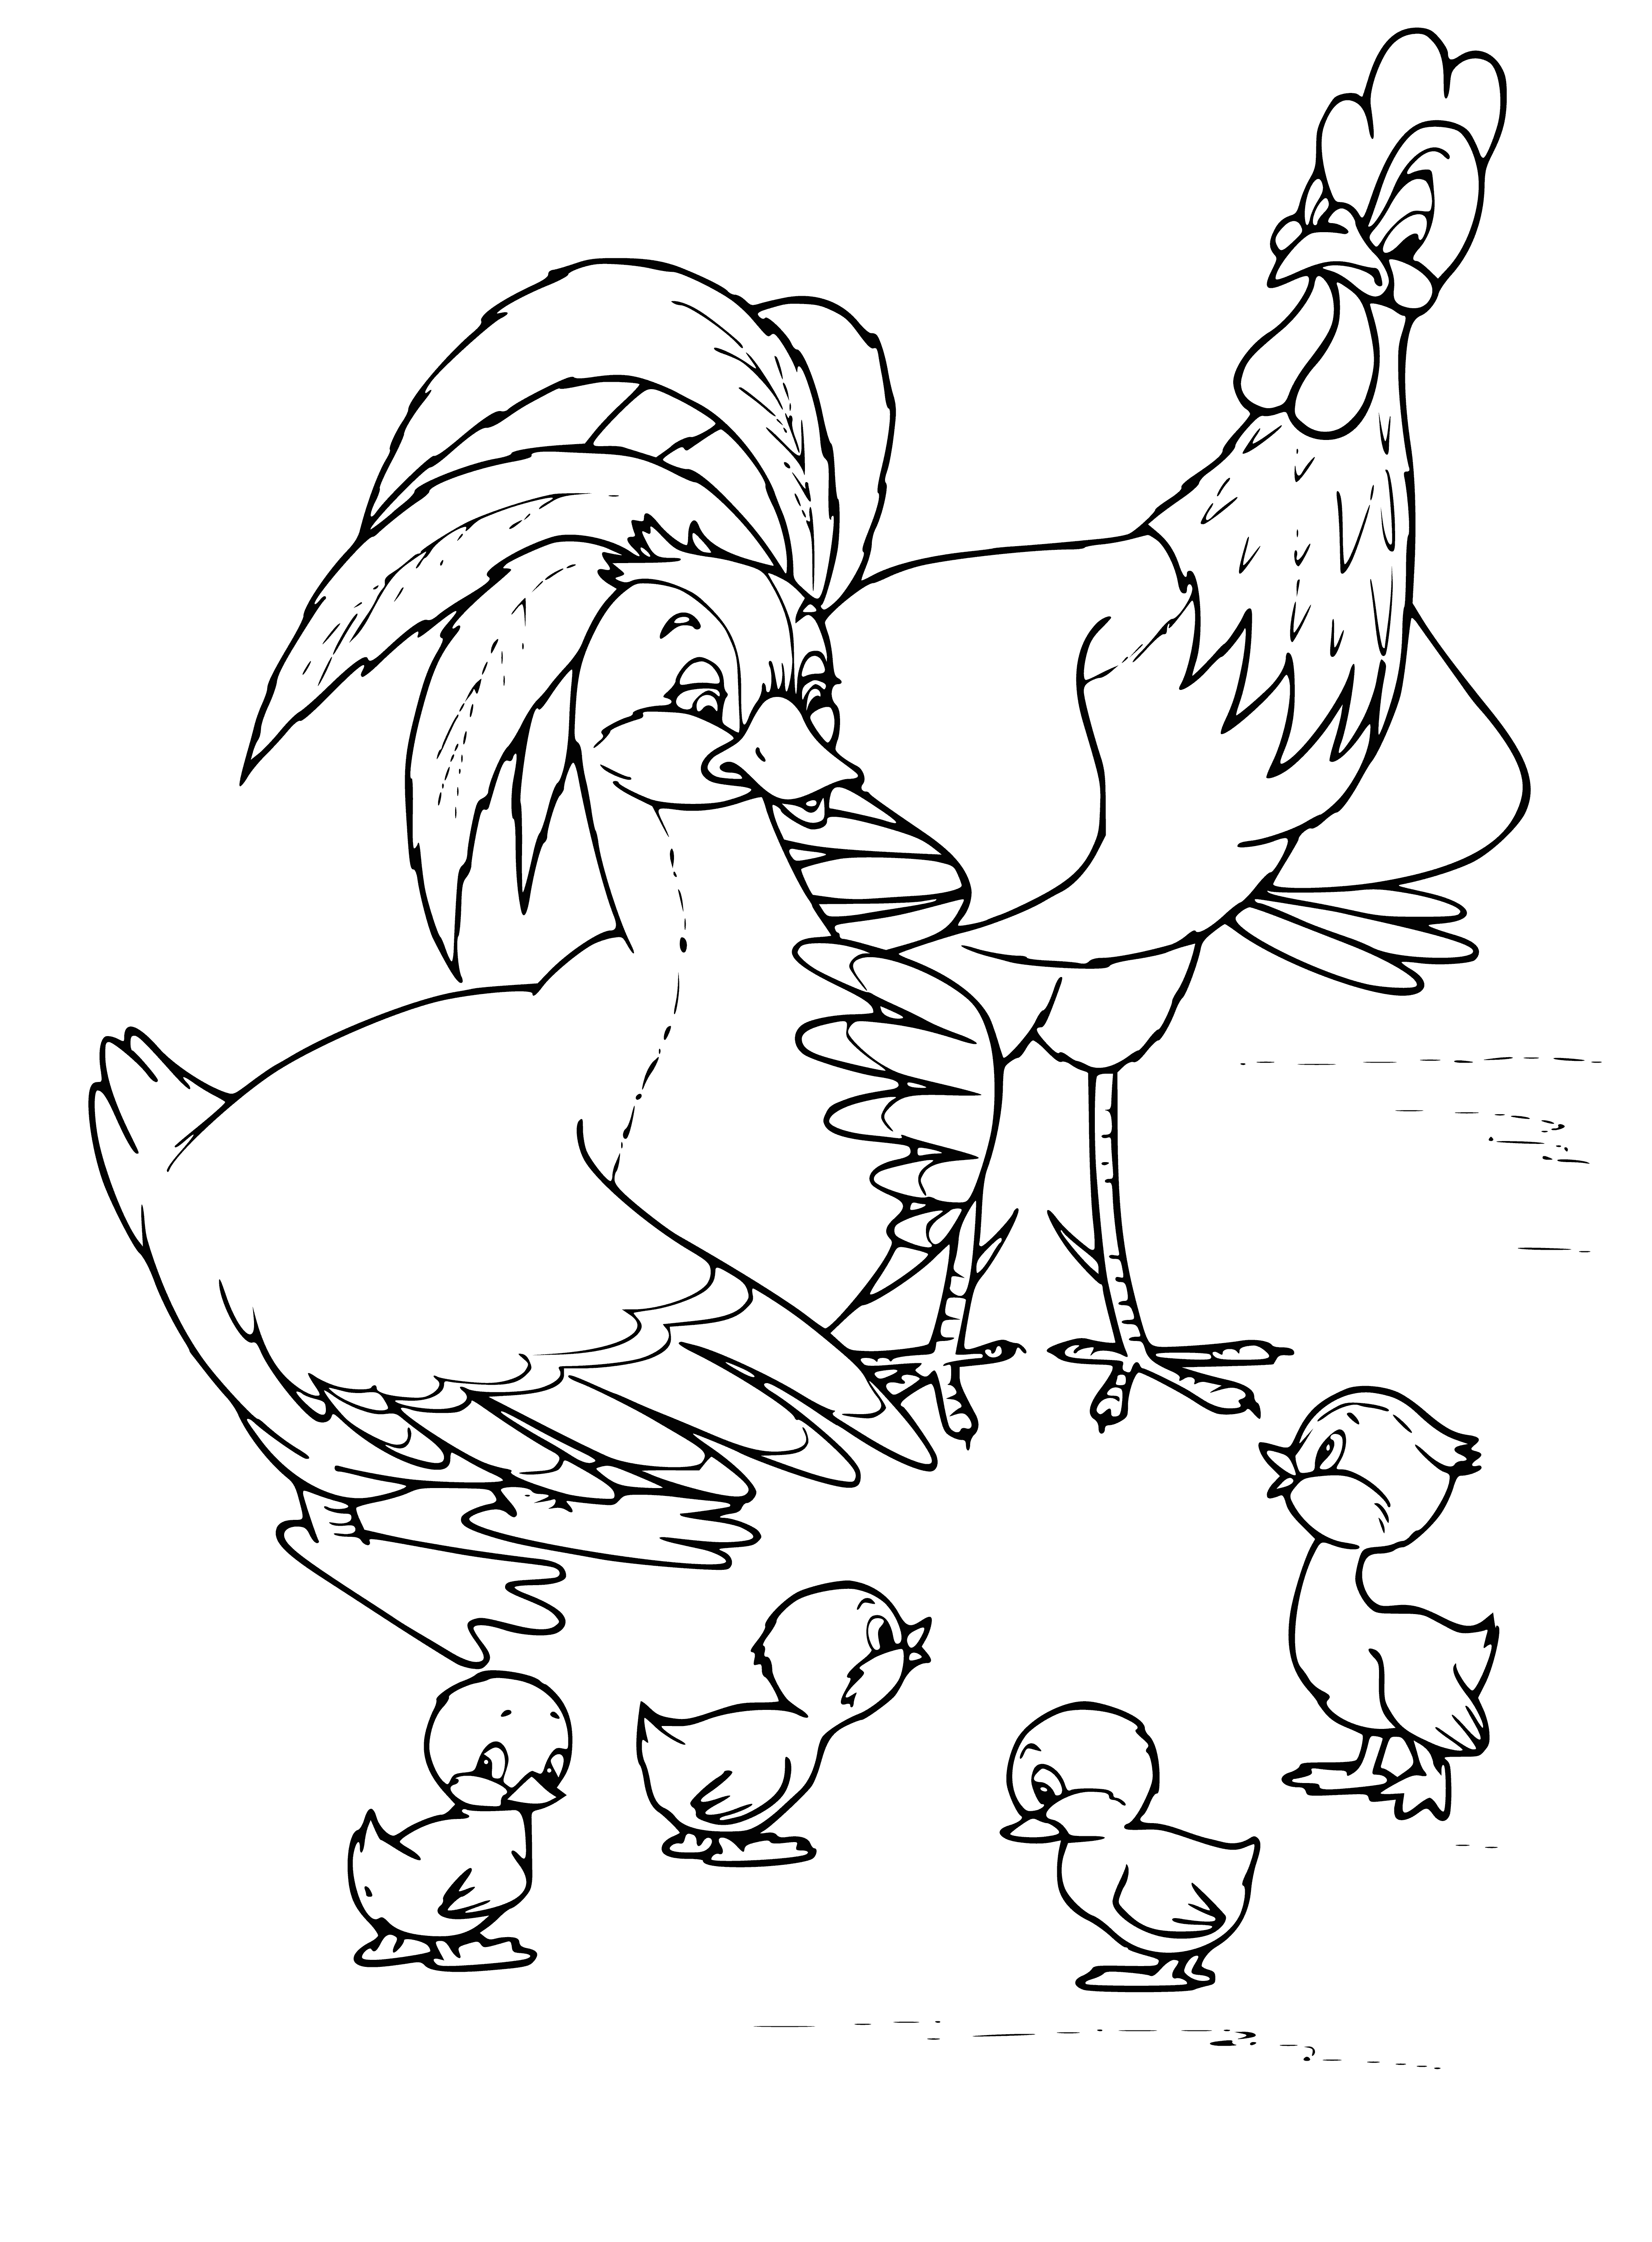 coloring page: Five nesting birdhouses with a duckling in each, from 1st to 5th; a fun coloring page for kids!